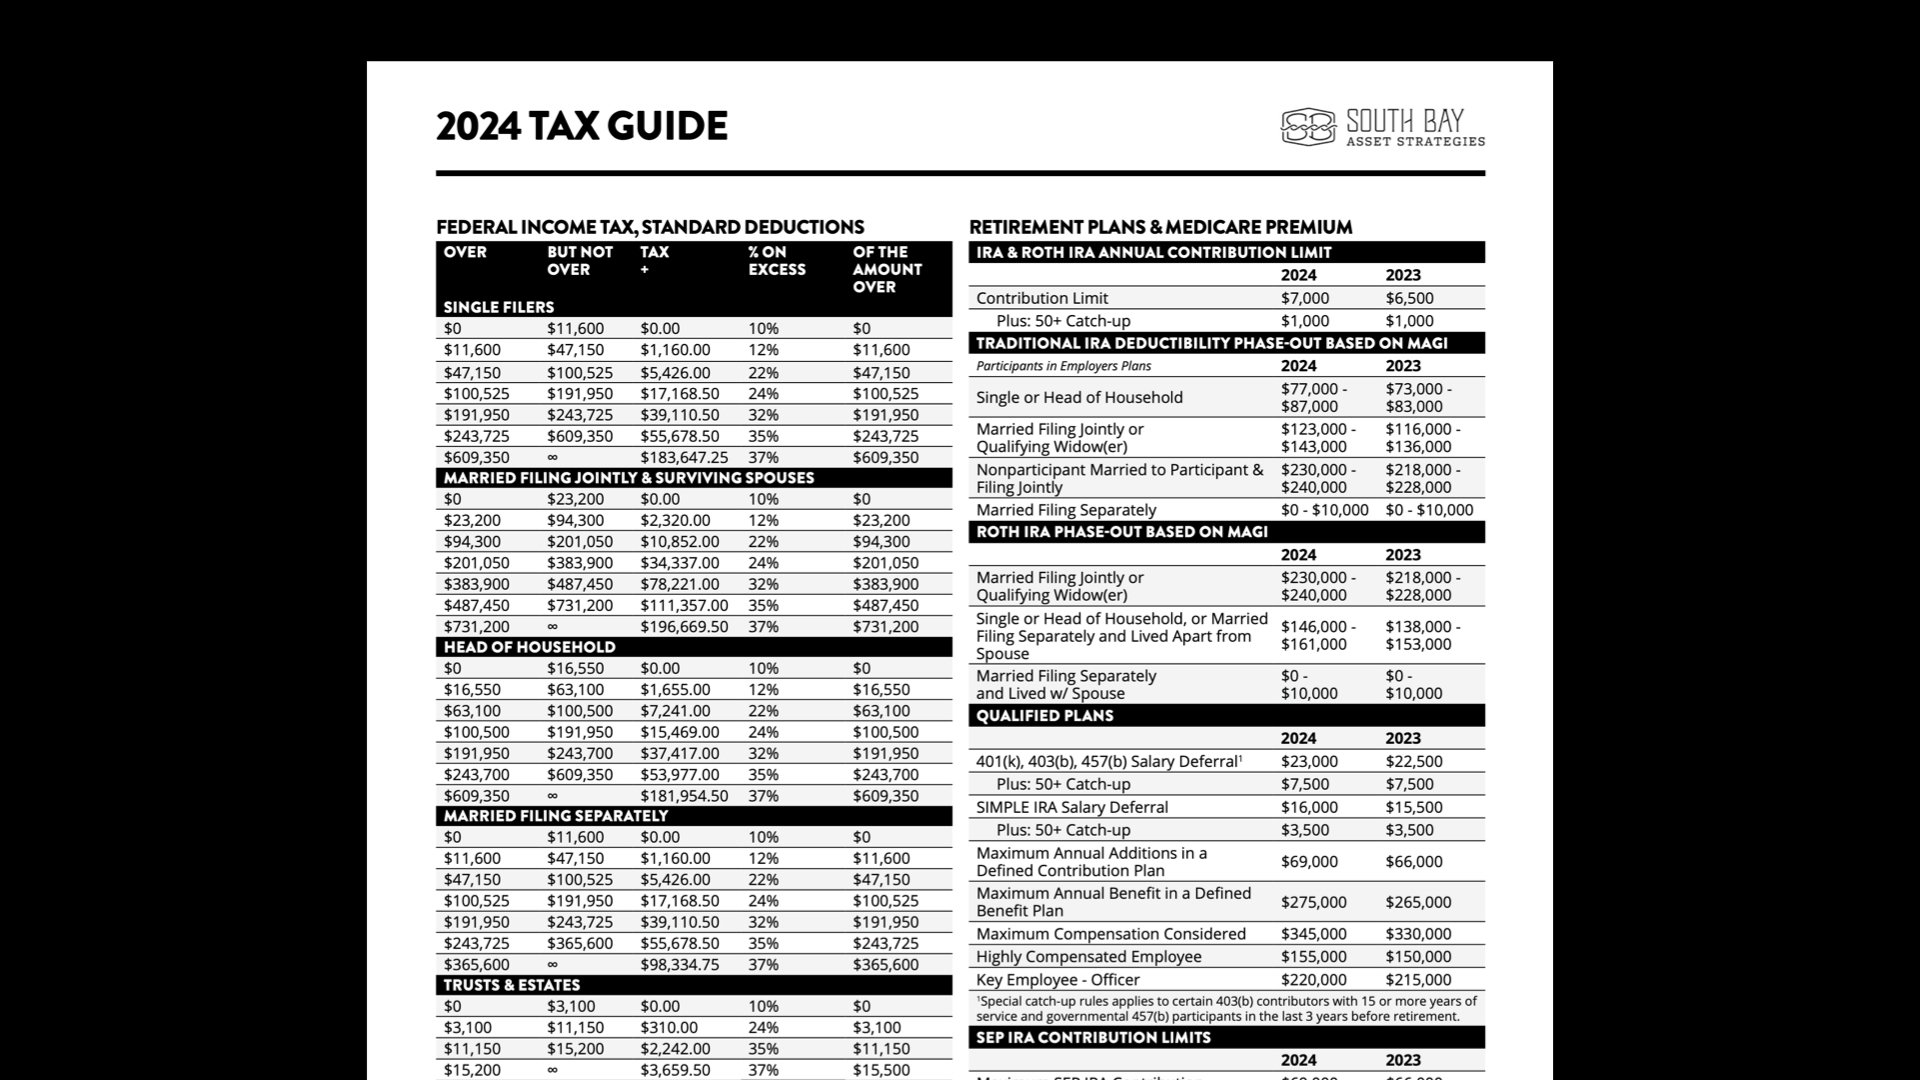 Get your copy of the South Bay Asset Strategies 2024 Tax Guide